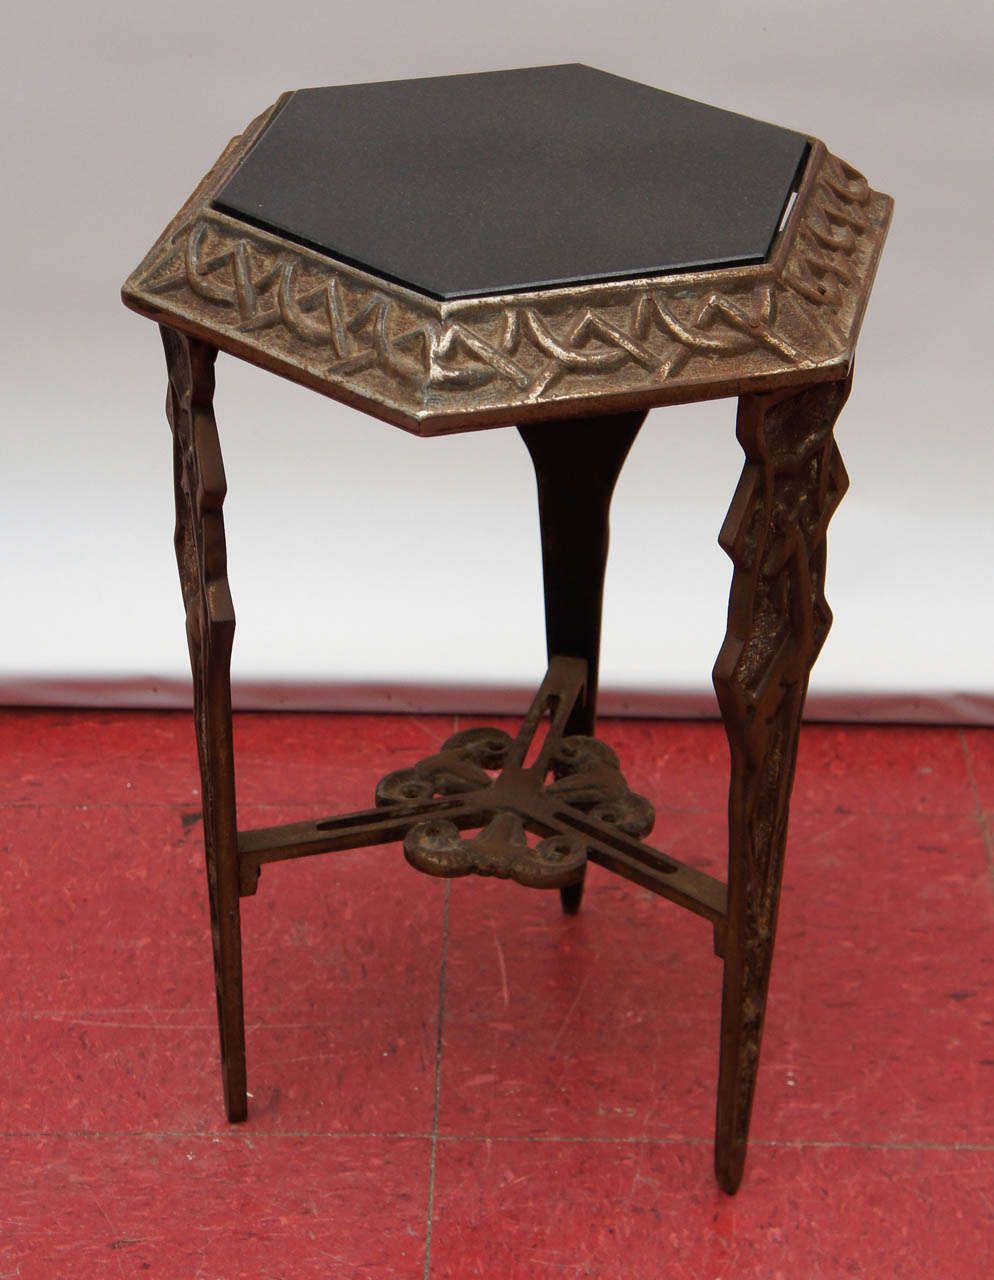 Cast Iron Figural Hexagonal Side Table with granite inset top, Patined Finish, Animal figures include a Giraffes and Rams heads.